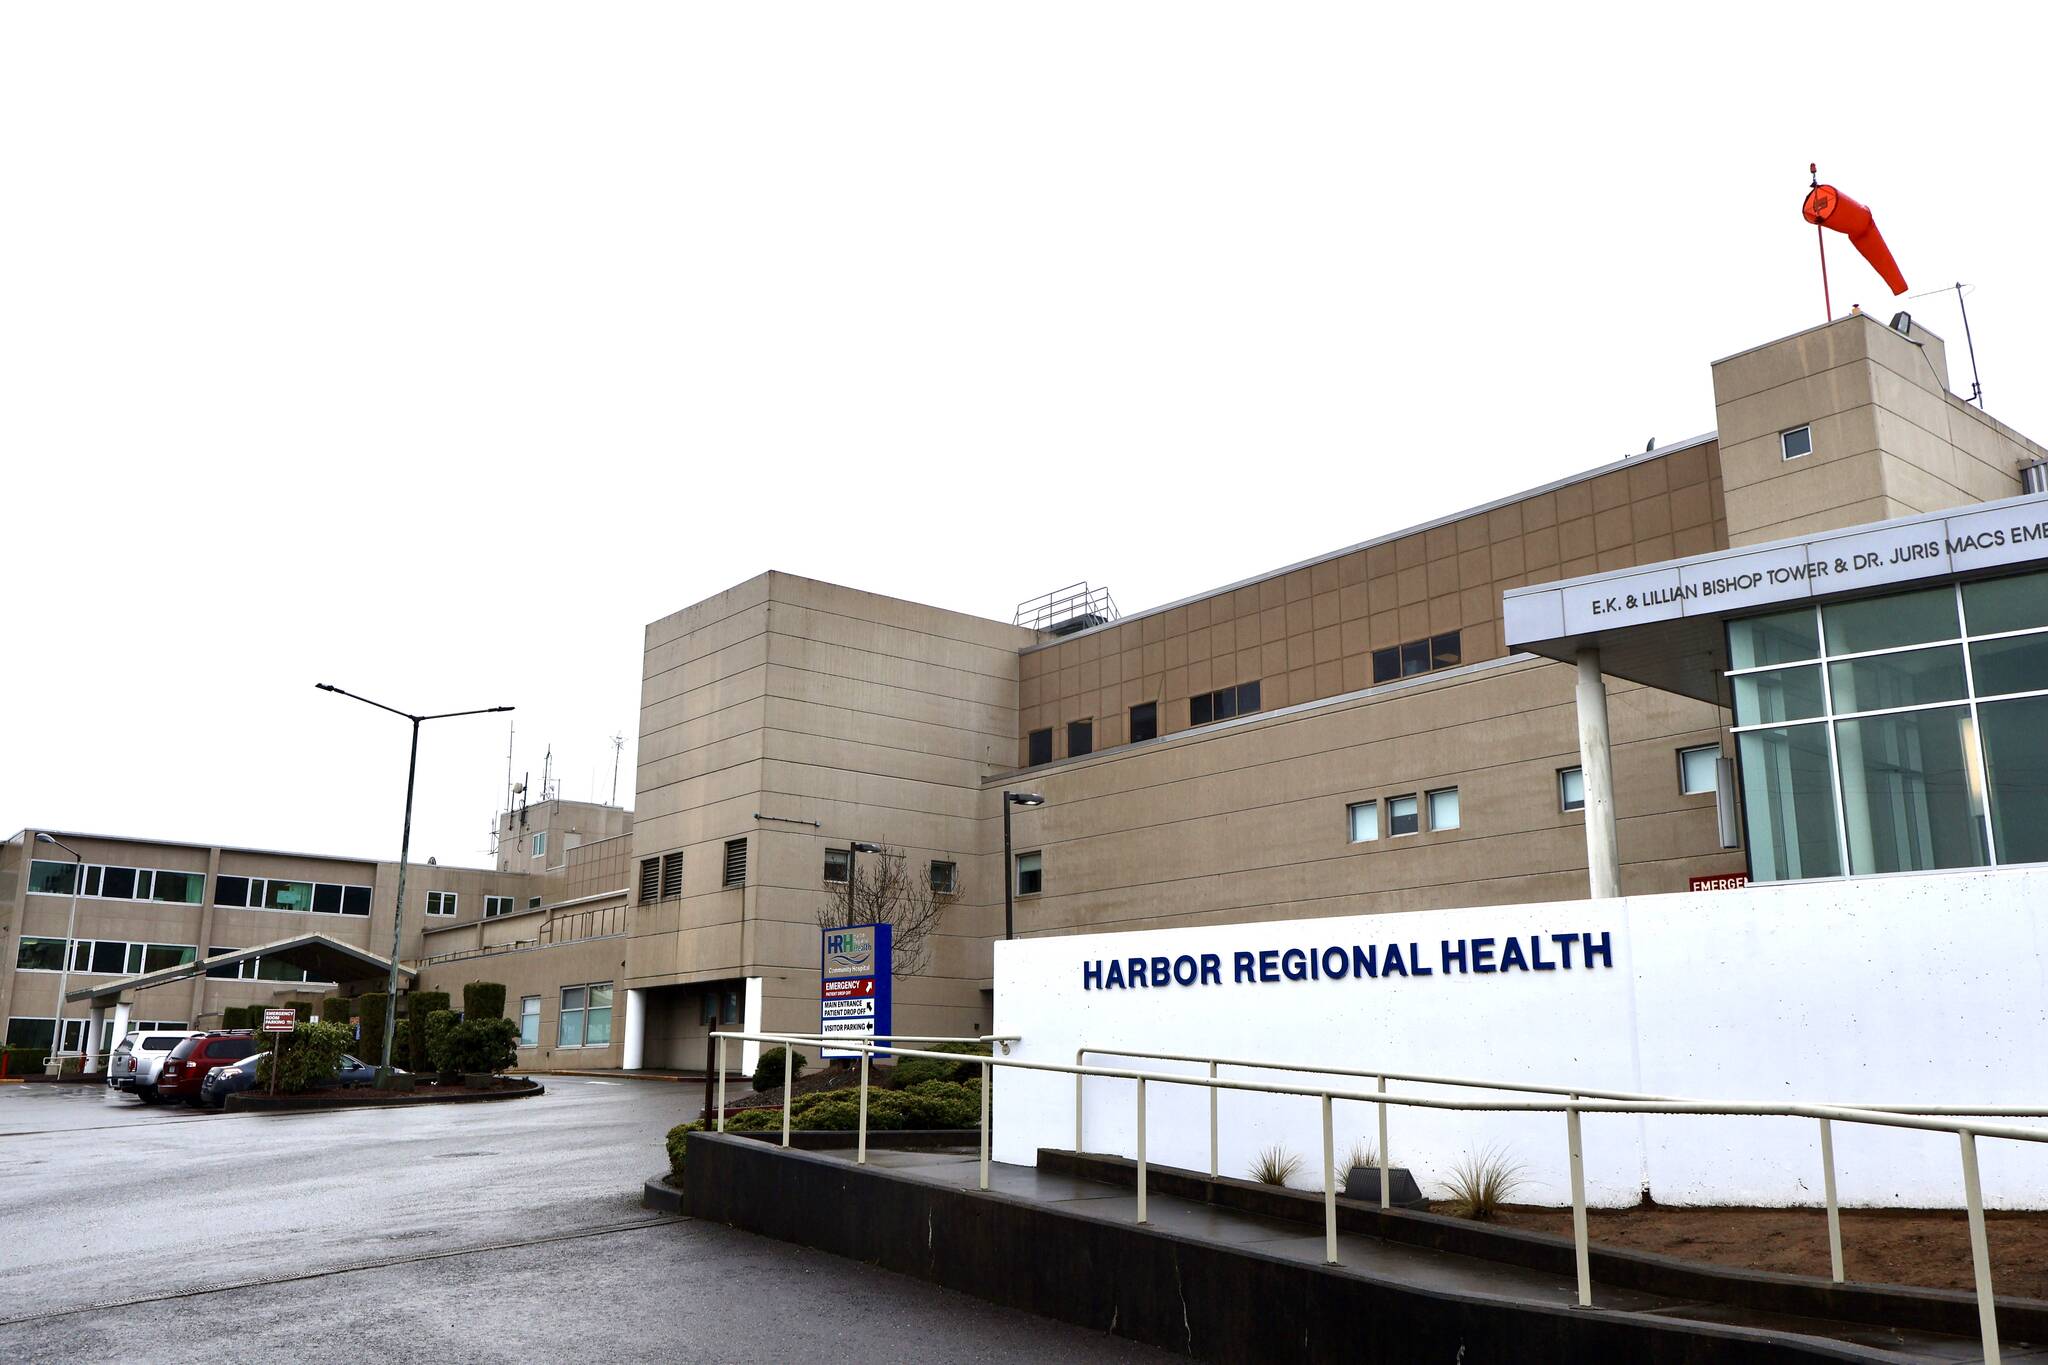 A cyberattack on a billing service company has affected some Harbor Regional Health patients’ ability to pay their bills. (Michael S. Lockett / The Daily World)